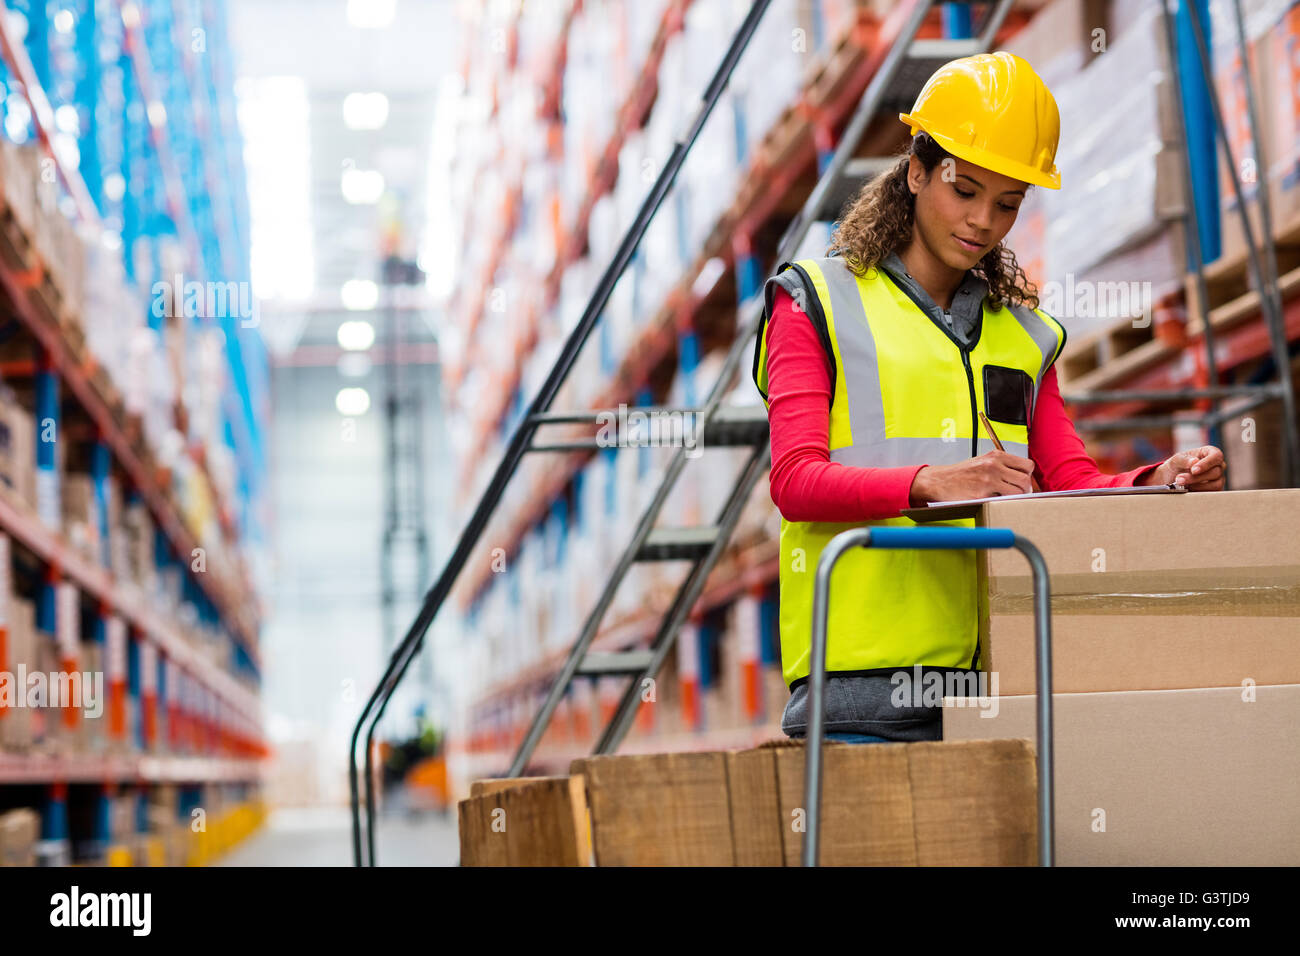 Woman worker doing inventory Stock Photo